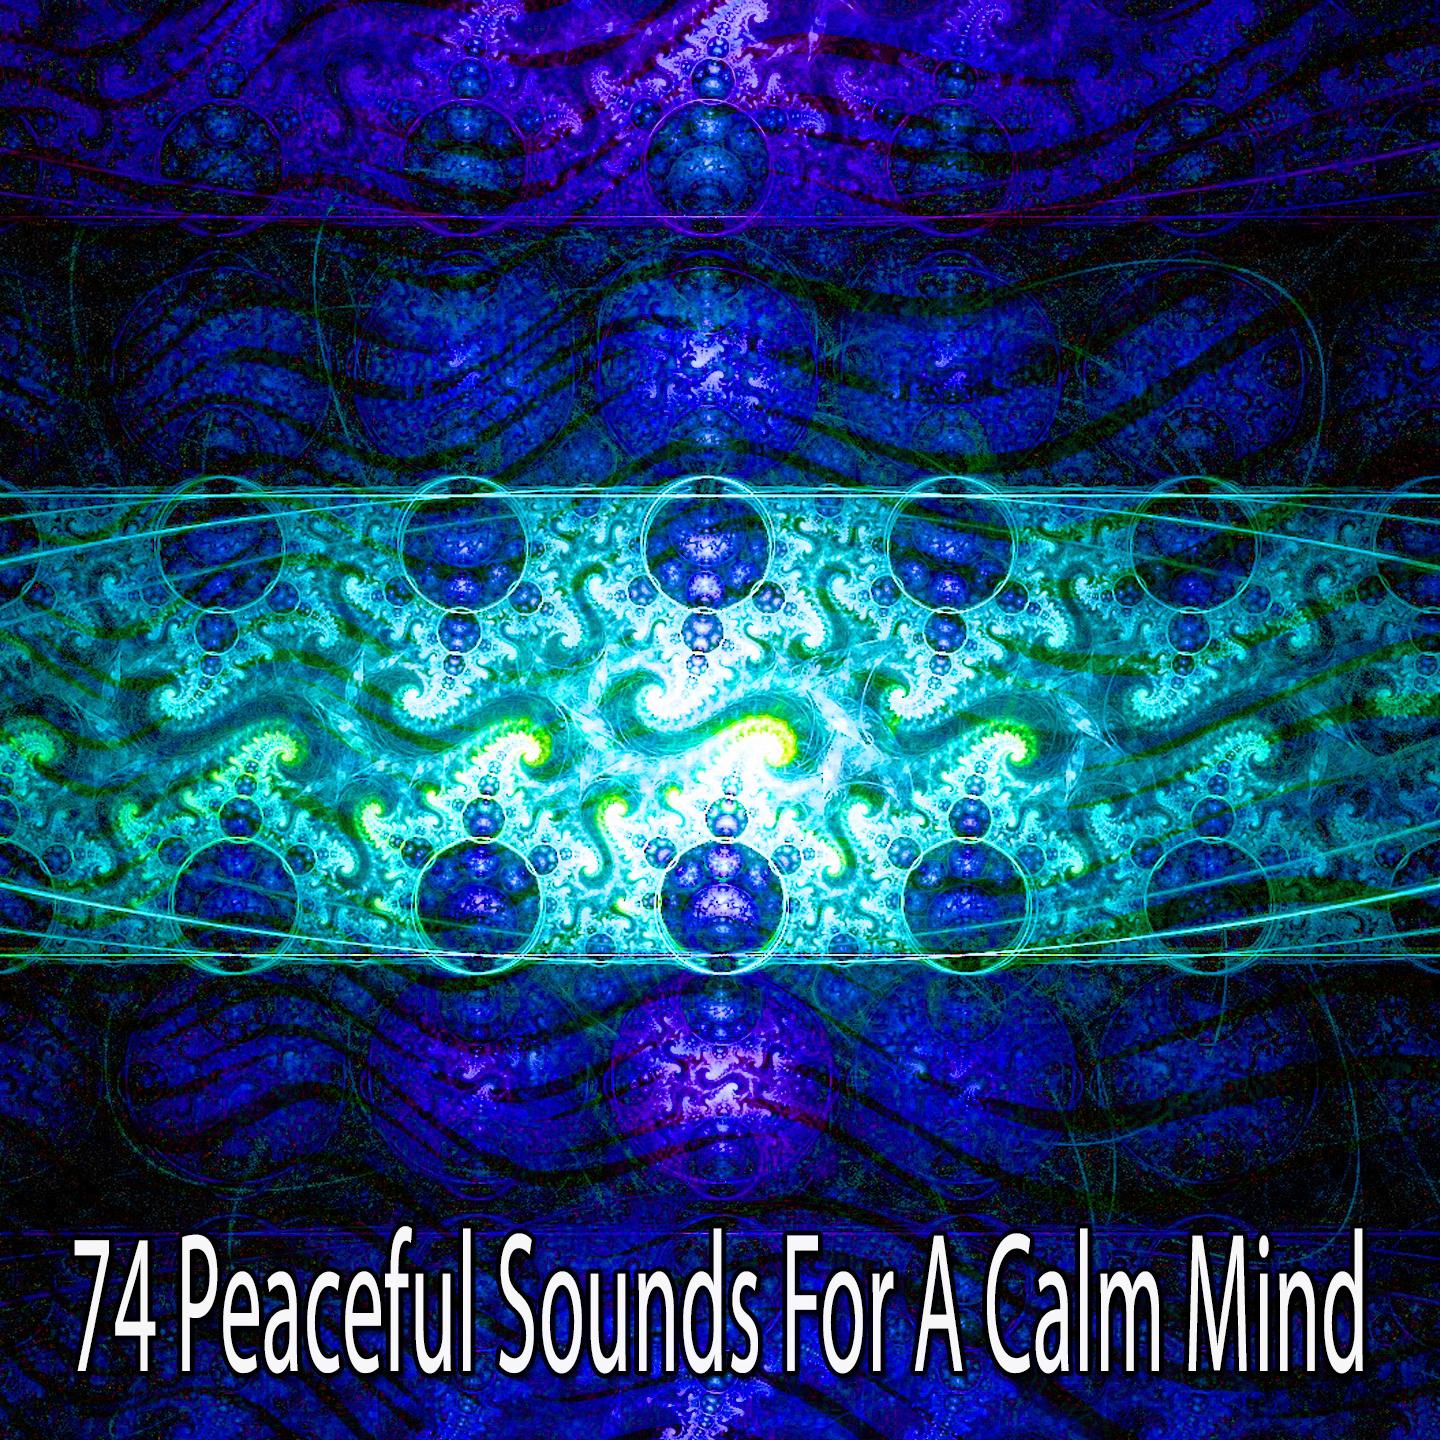 74 Peaceful Sounds for a Calm Mind